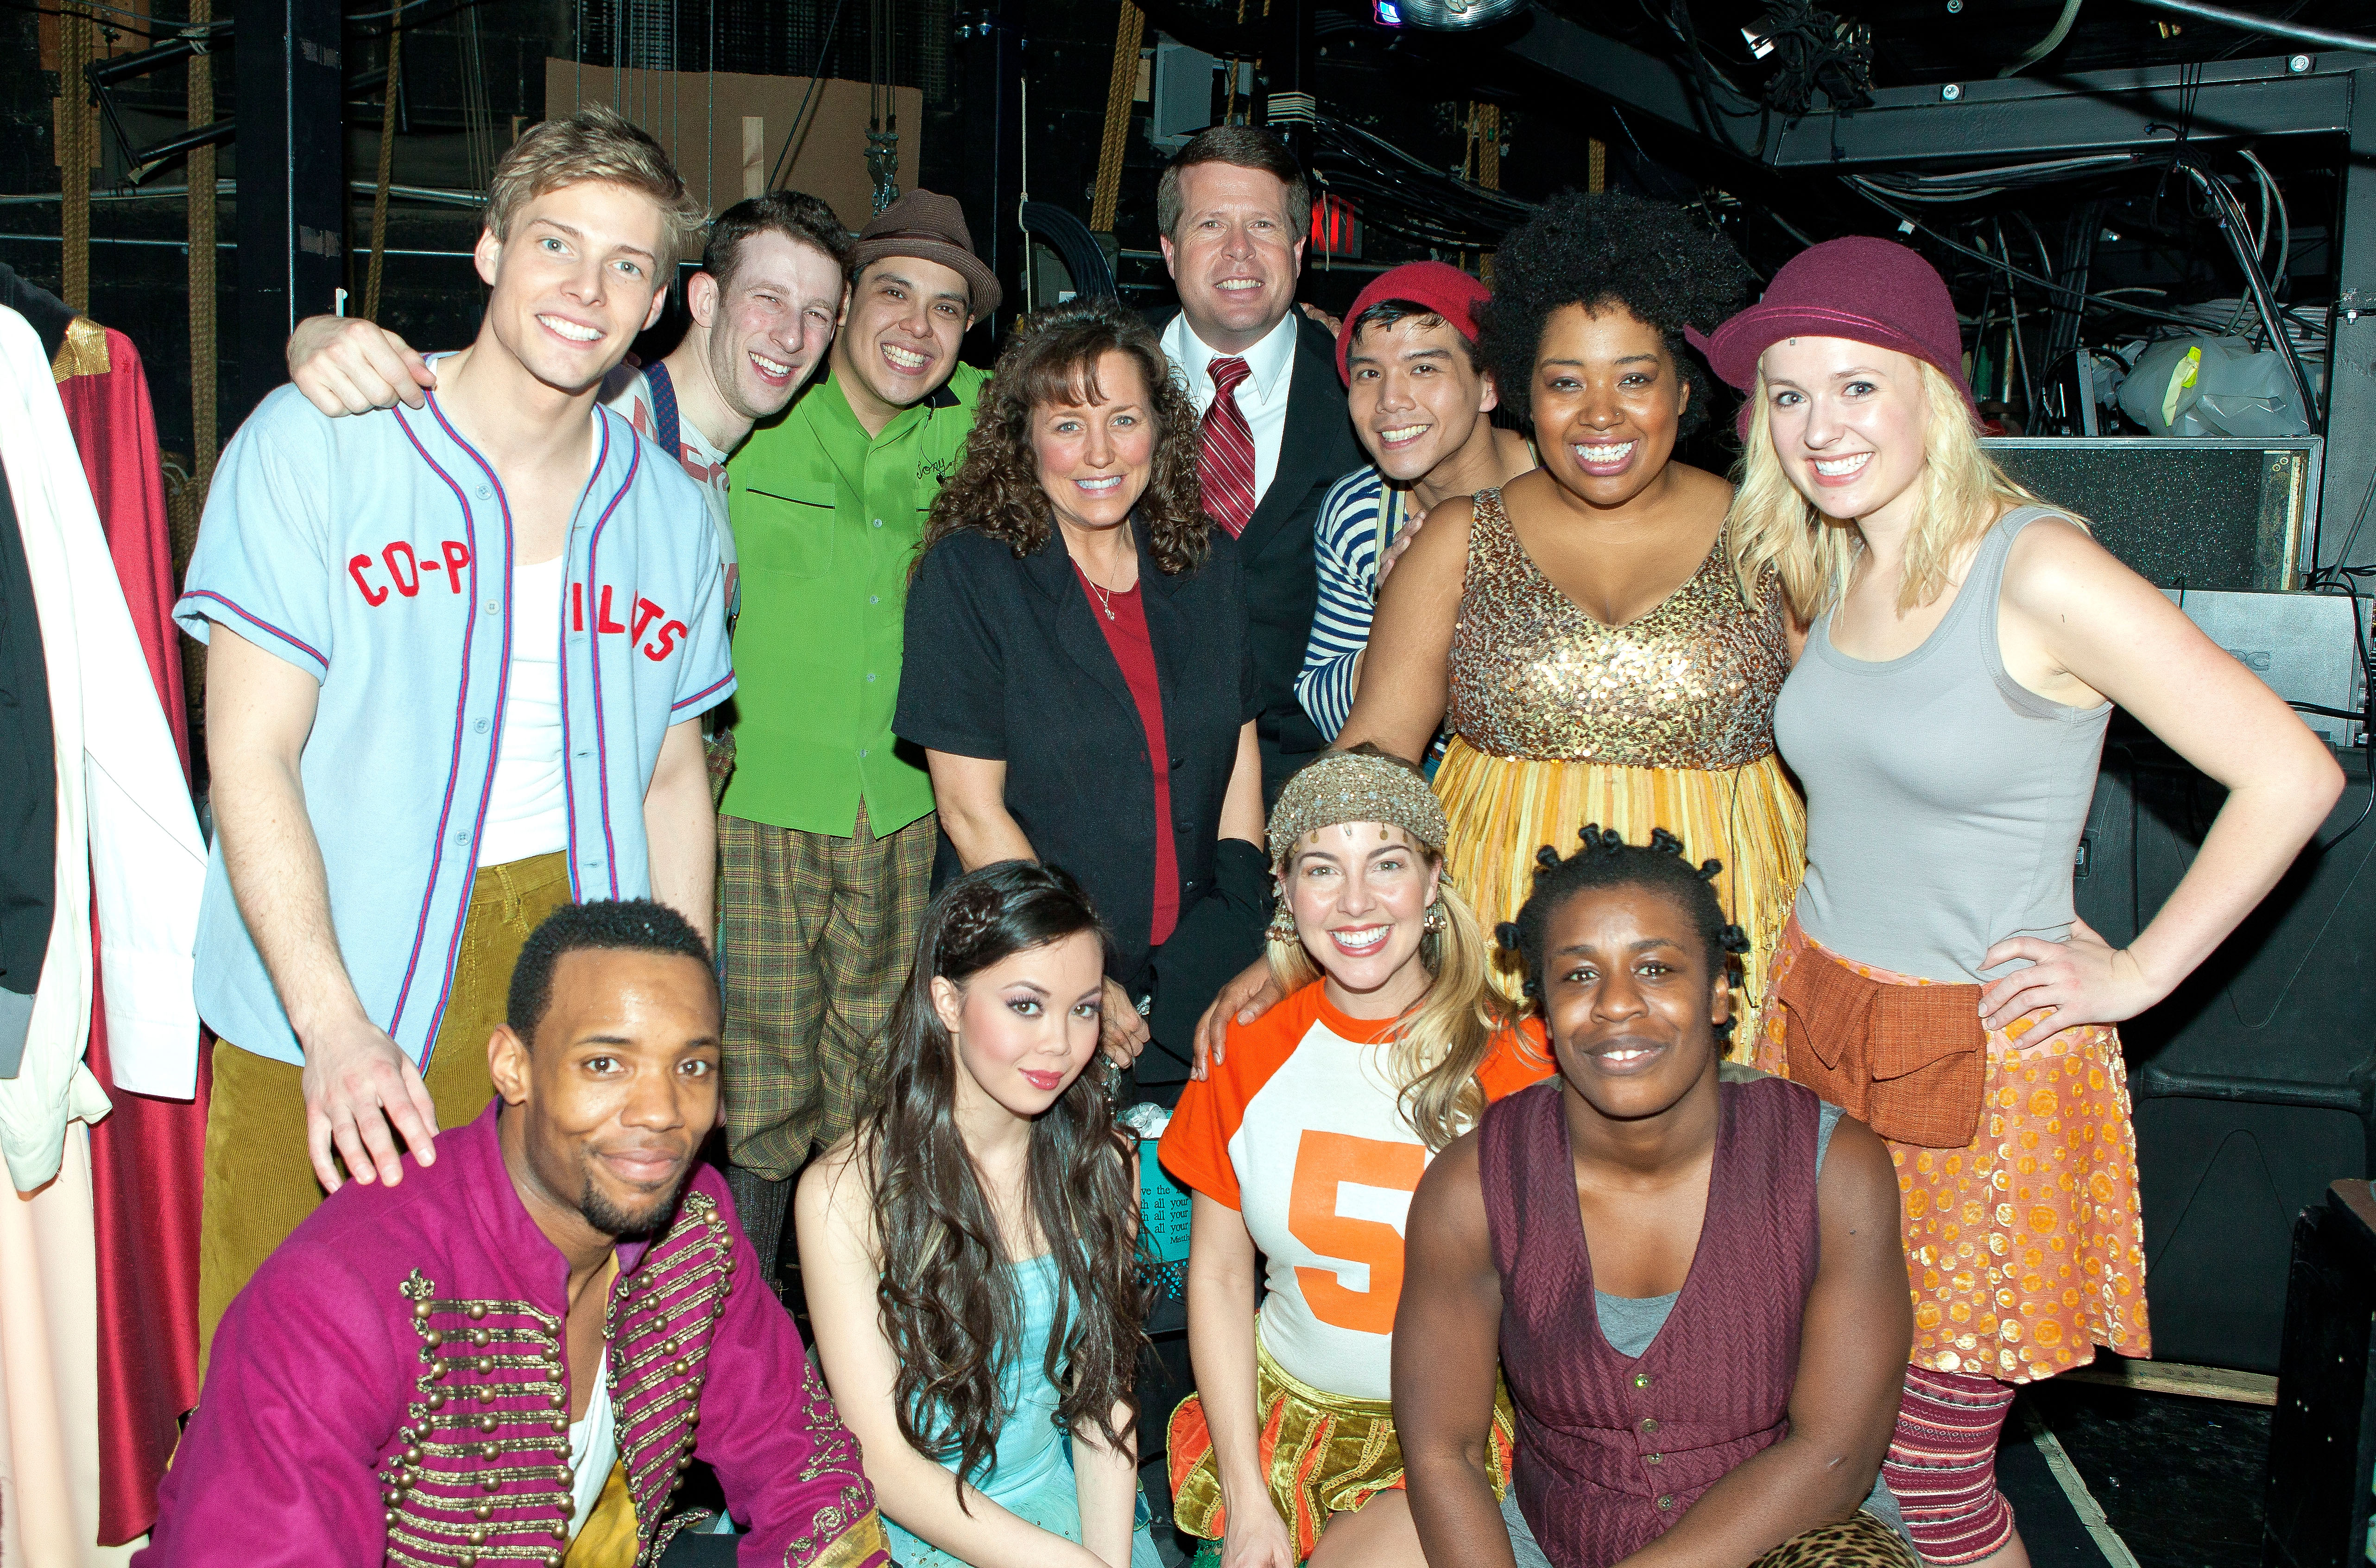 Jim Bob Duggar and Michelle Duggar from "19 Kids and Counting" pose with the cast backstage at the hit musical "Godspell" on Broadway in New York City, on February 16, 2012. | Source: Getty Images